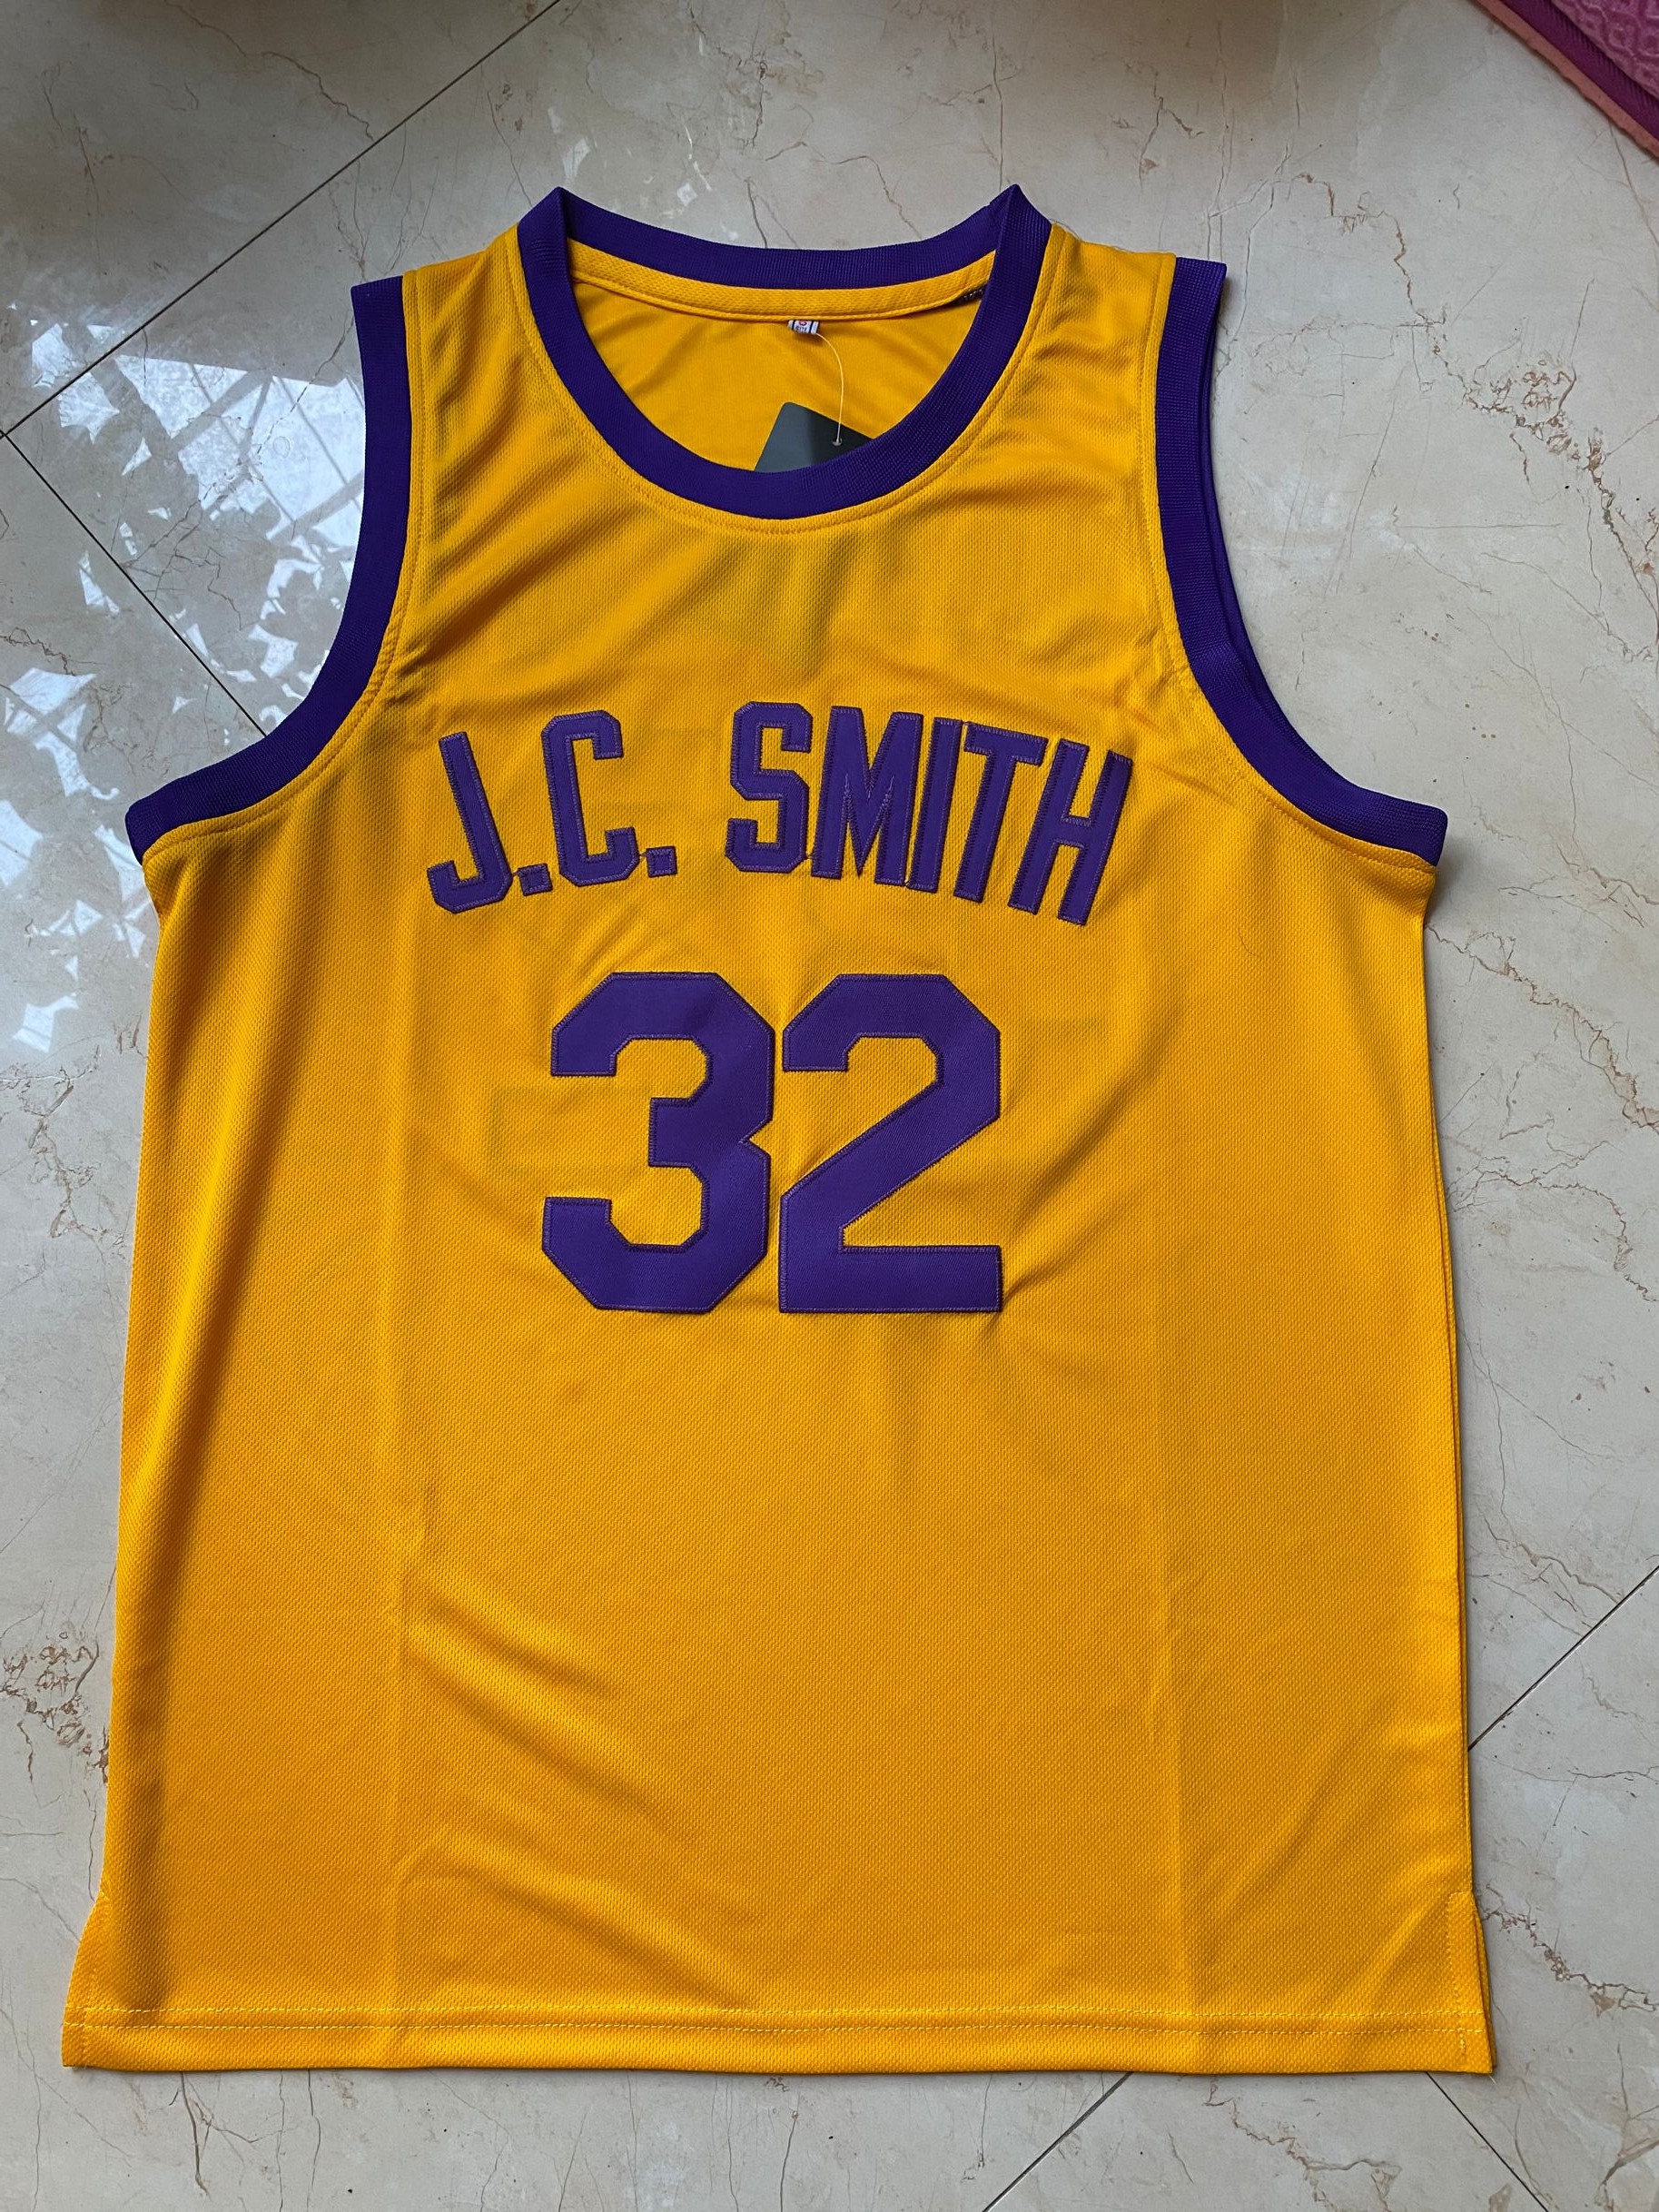 

Movie J.C. Smith 32 The Goat Earl Manigault Rebound Jersey Men Basketball Hip Hop For Sport Fans Breathable Team Color Yellow Pure Cotton University Top Quality